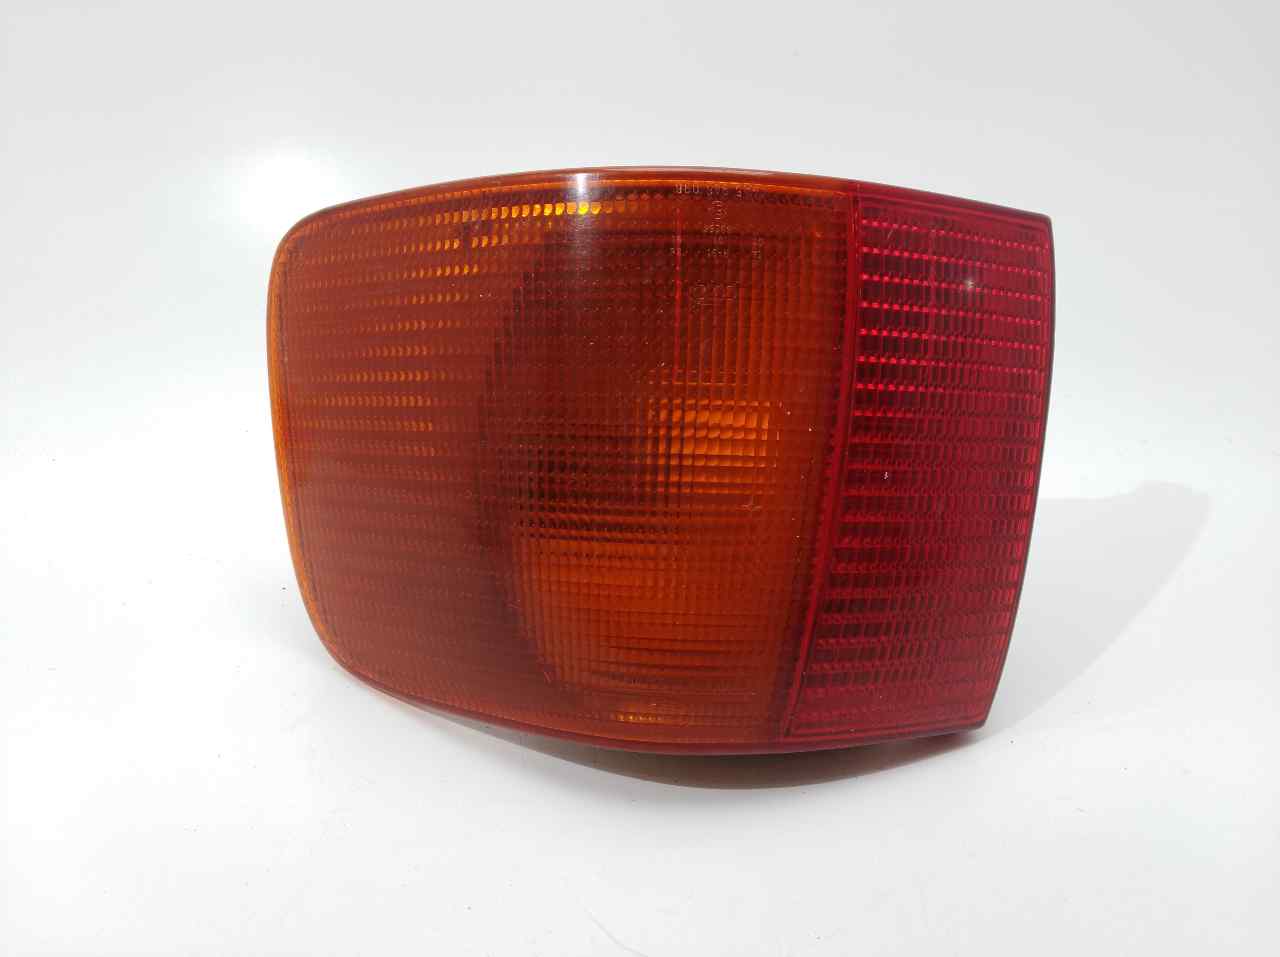 AUDI A6 C4/4A (1994-1997) Rear Right Taillight Lamp 4A5945096, 4A5945096, 4A5945096 24512504